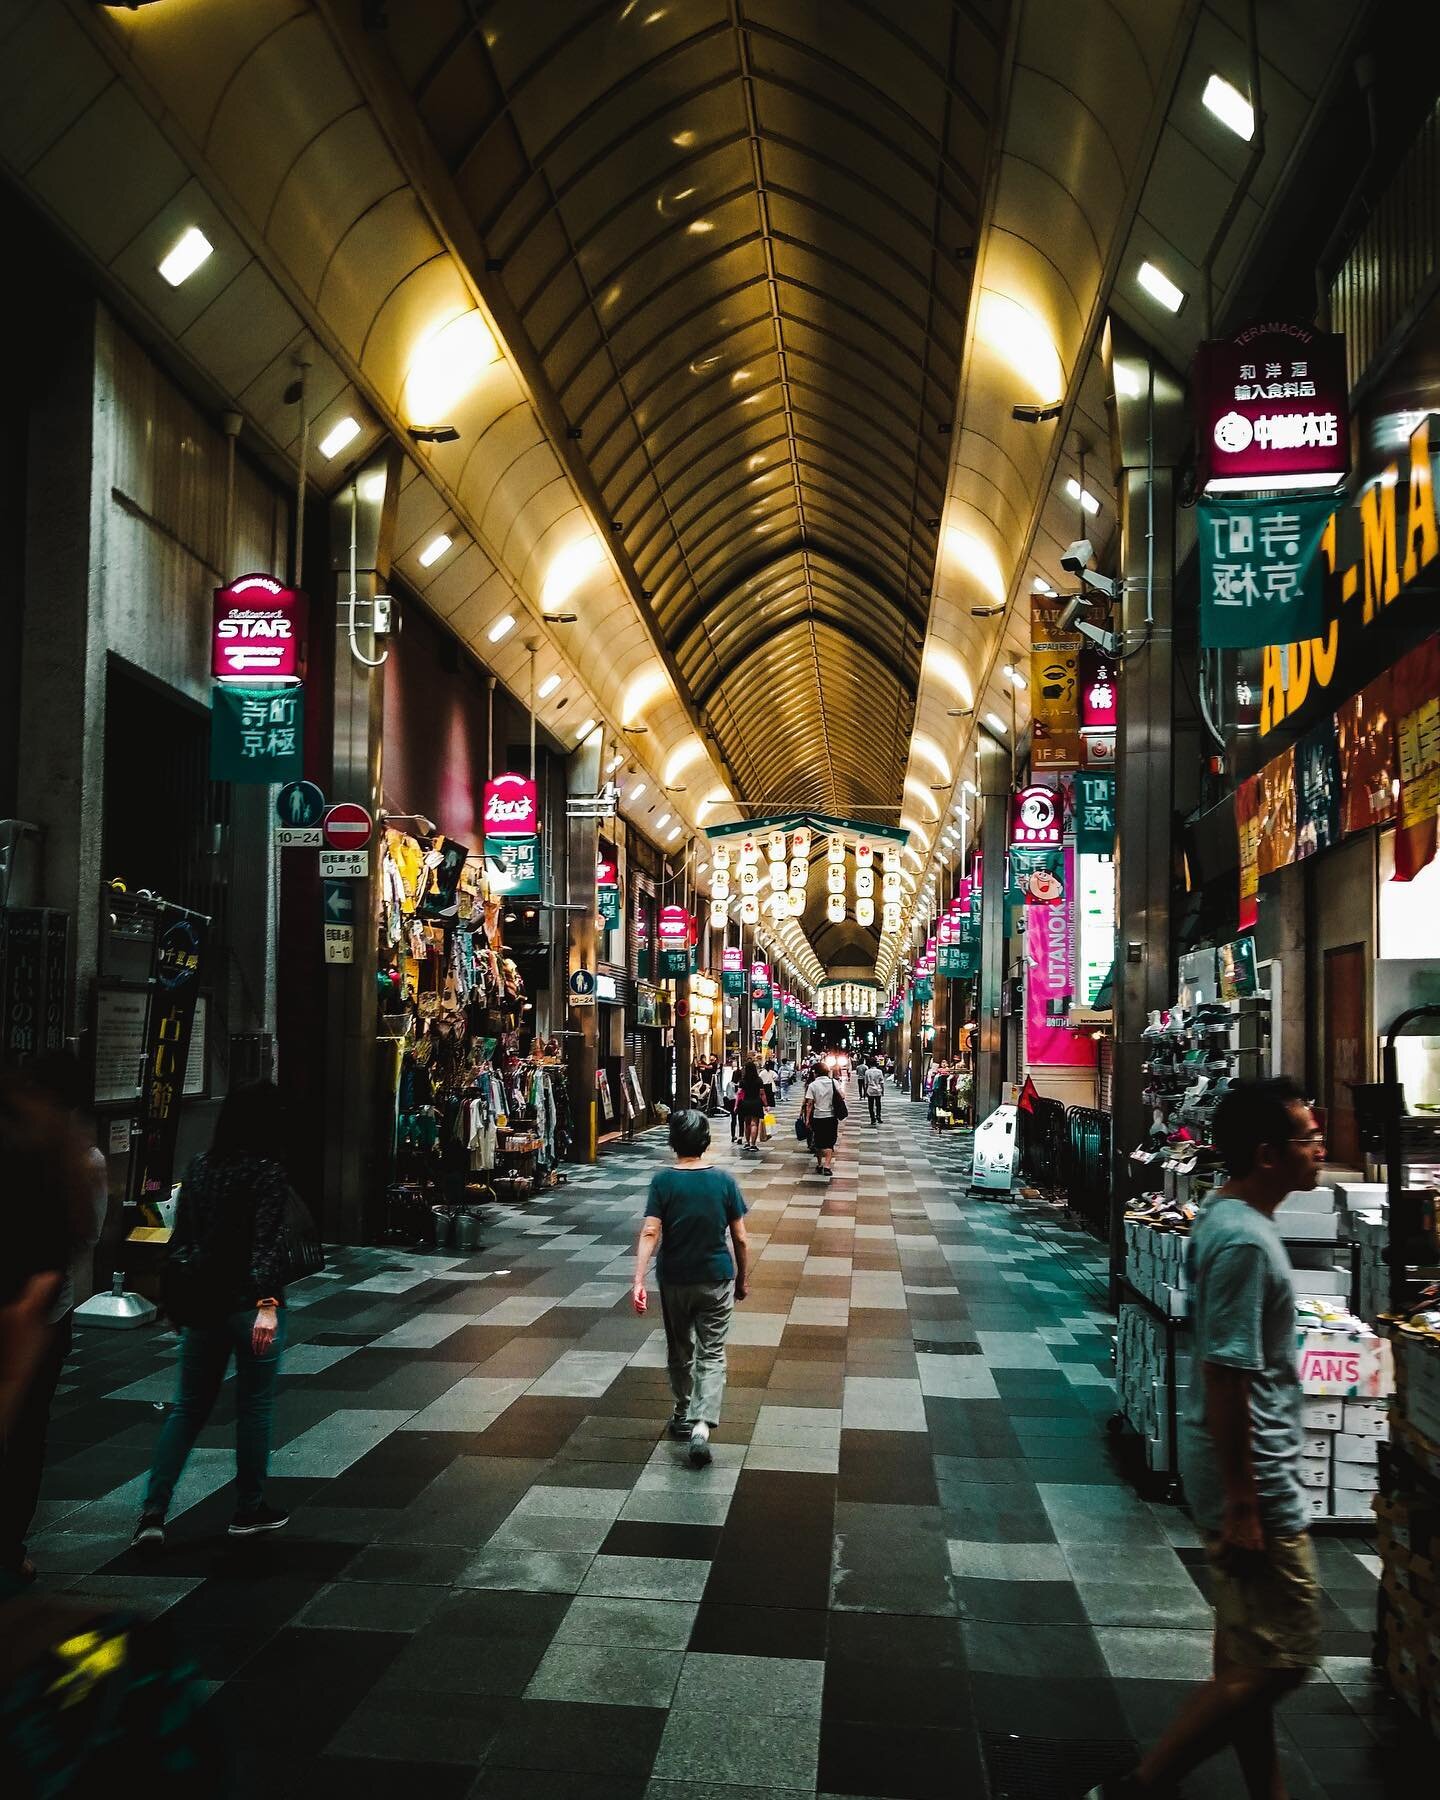 Archive: this was taken at Nishiki Market just before closing. We arrived late from the train and met up with our friend @tamurakoichiro for a late round of exploration. The individual touches on every stall doors was such an  inspiration for public 